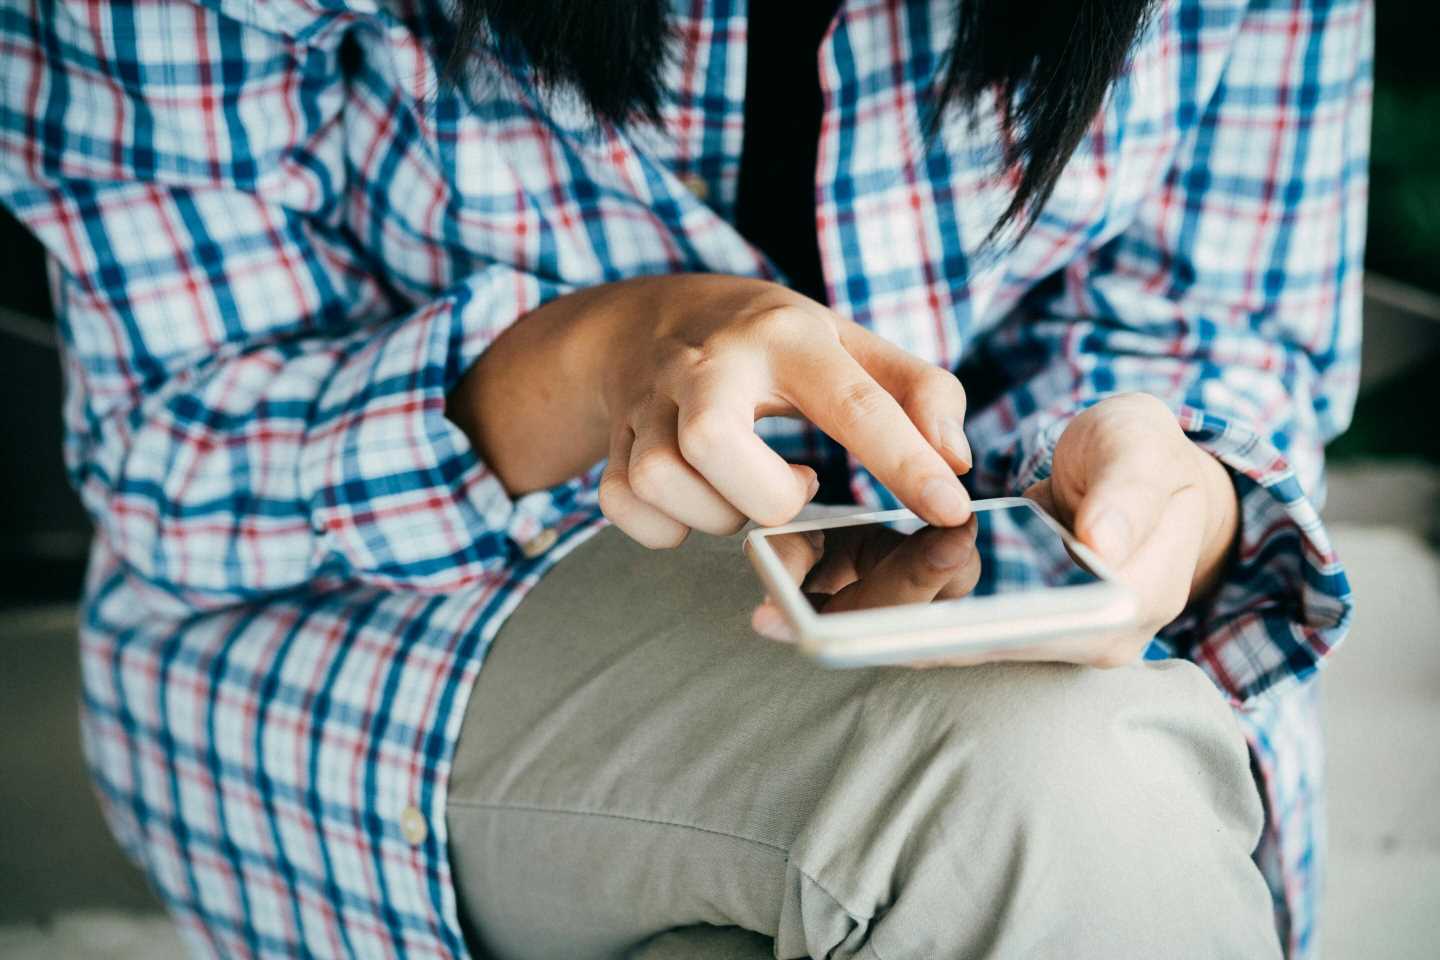 More than four hours of daily smartphone use associated with health risks for adolescents